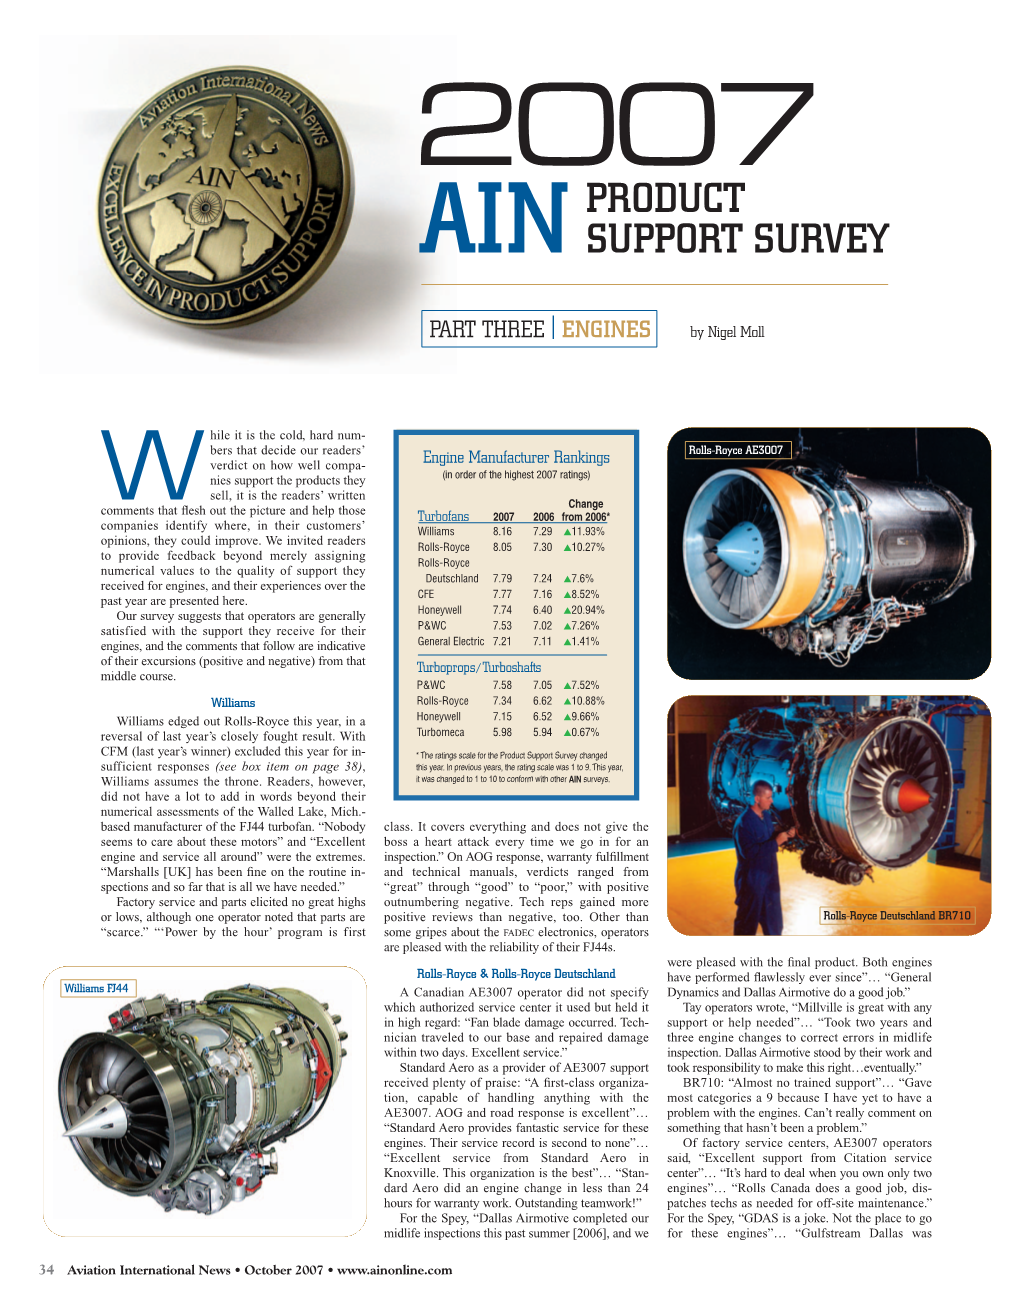 AIN Product Support Survey: Engines